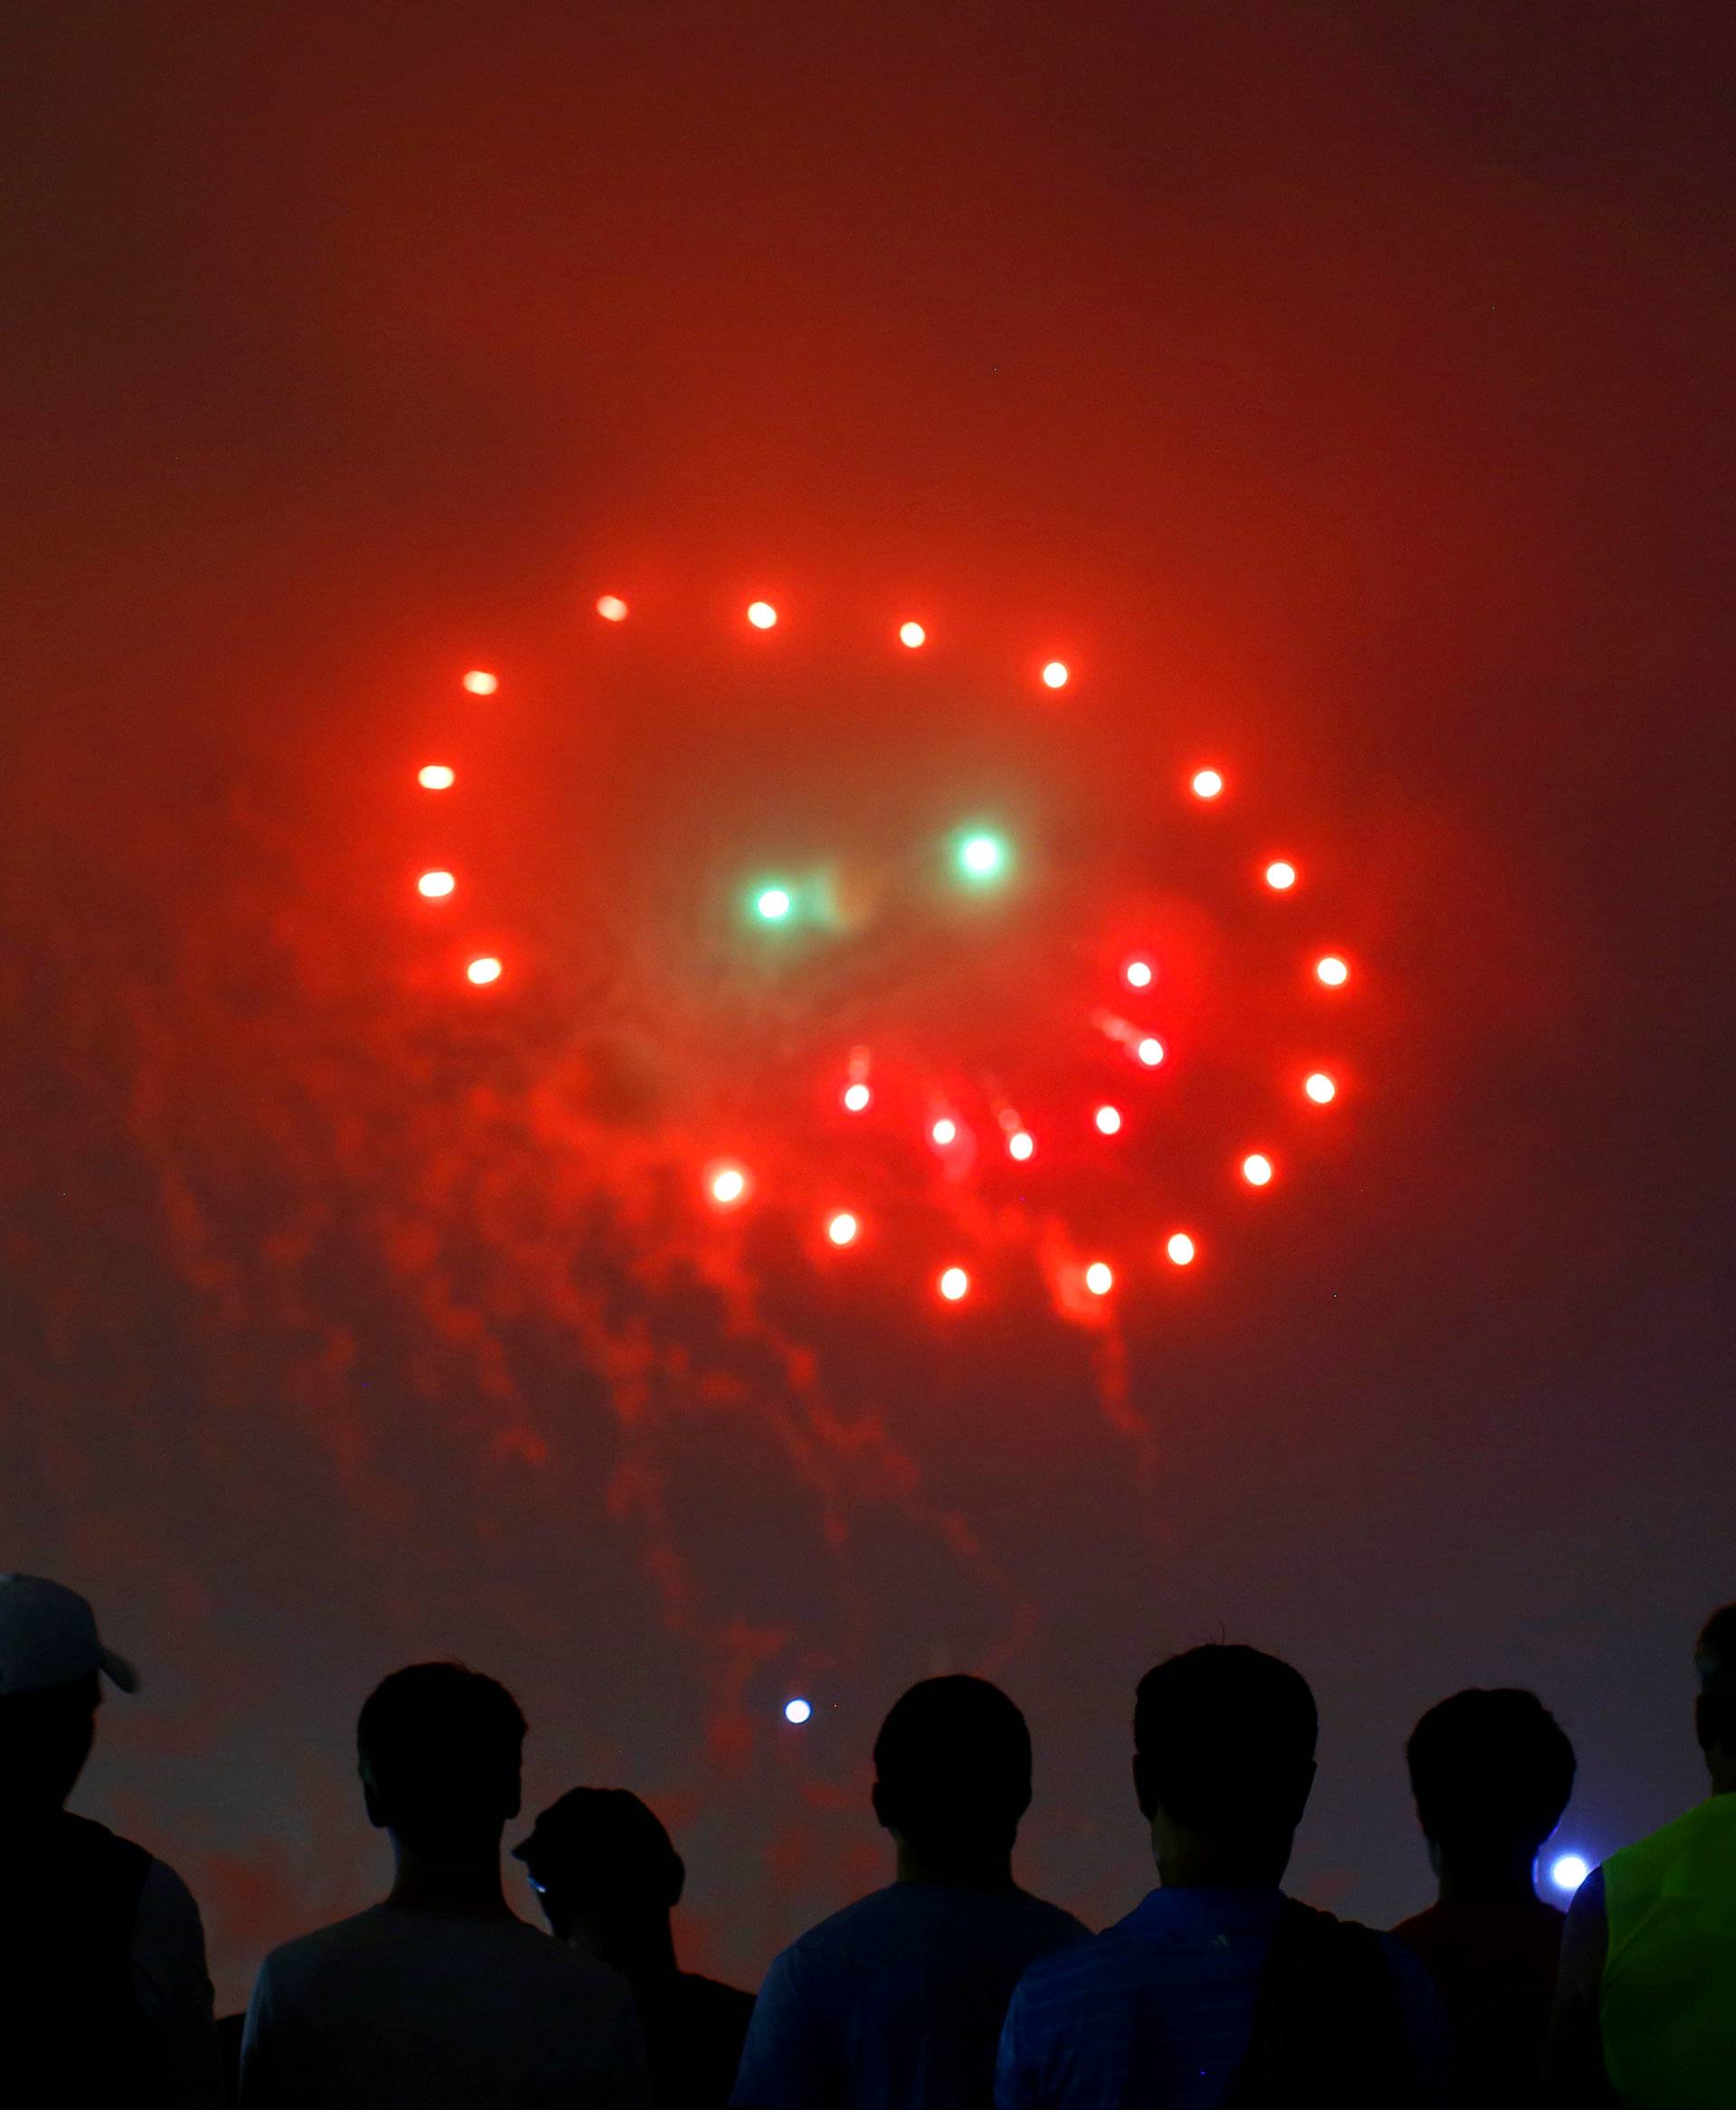 People watch fireworks in the form of a 'smiley face' during the 4th of July Independence Day celebrations at the National Mall in Washington, U.S.